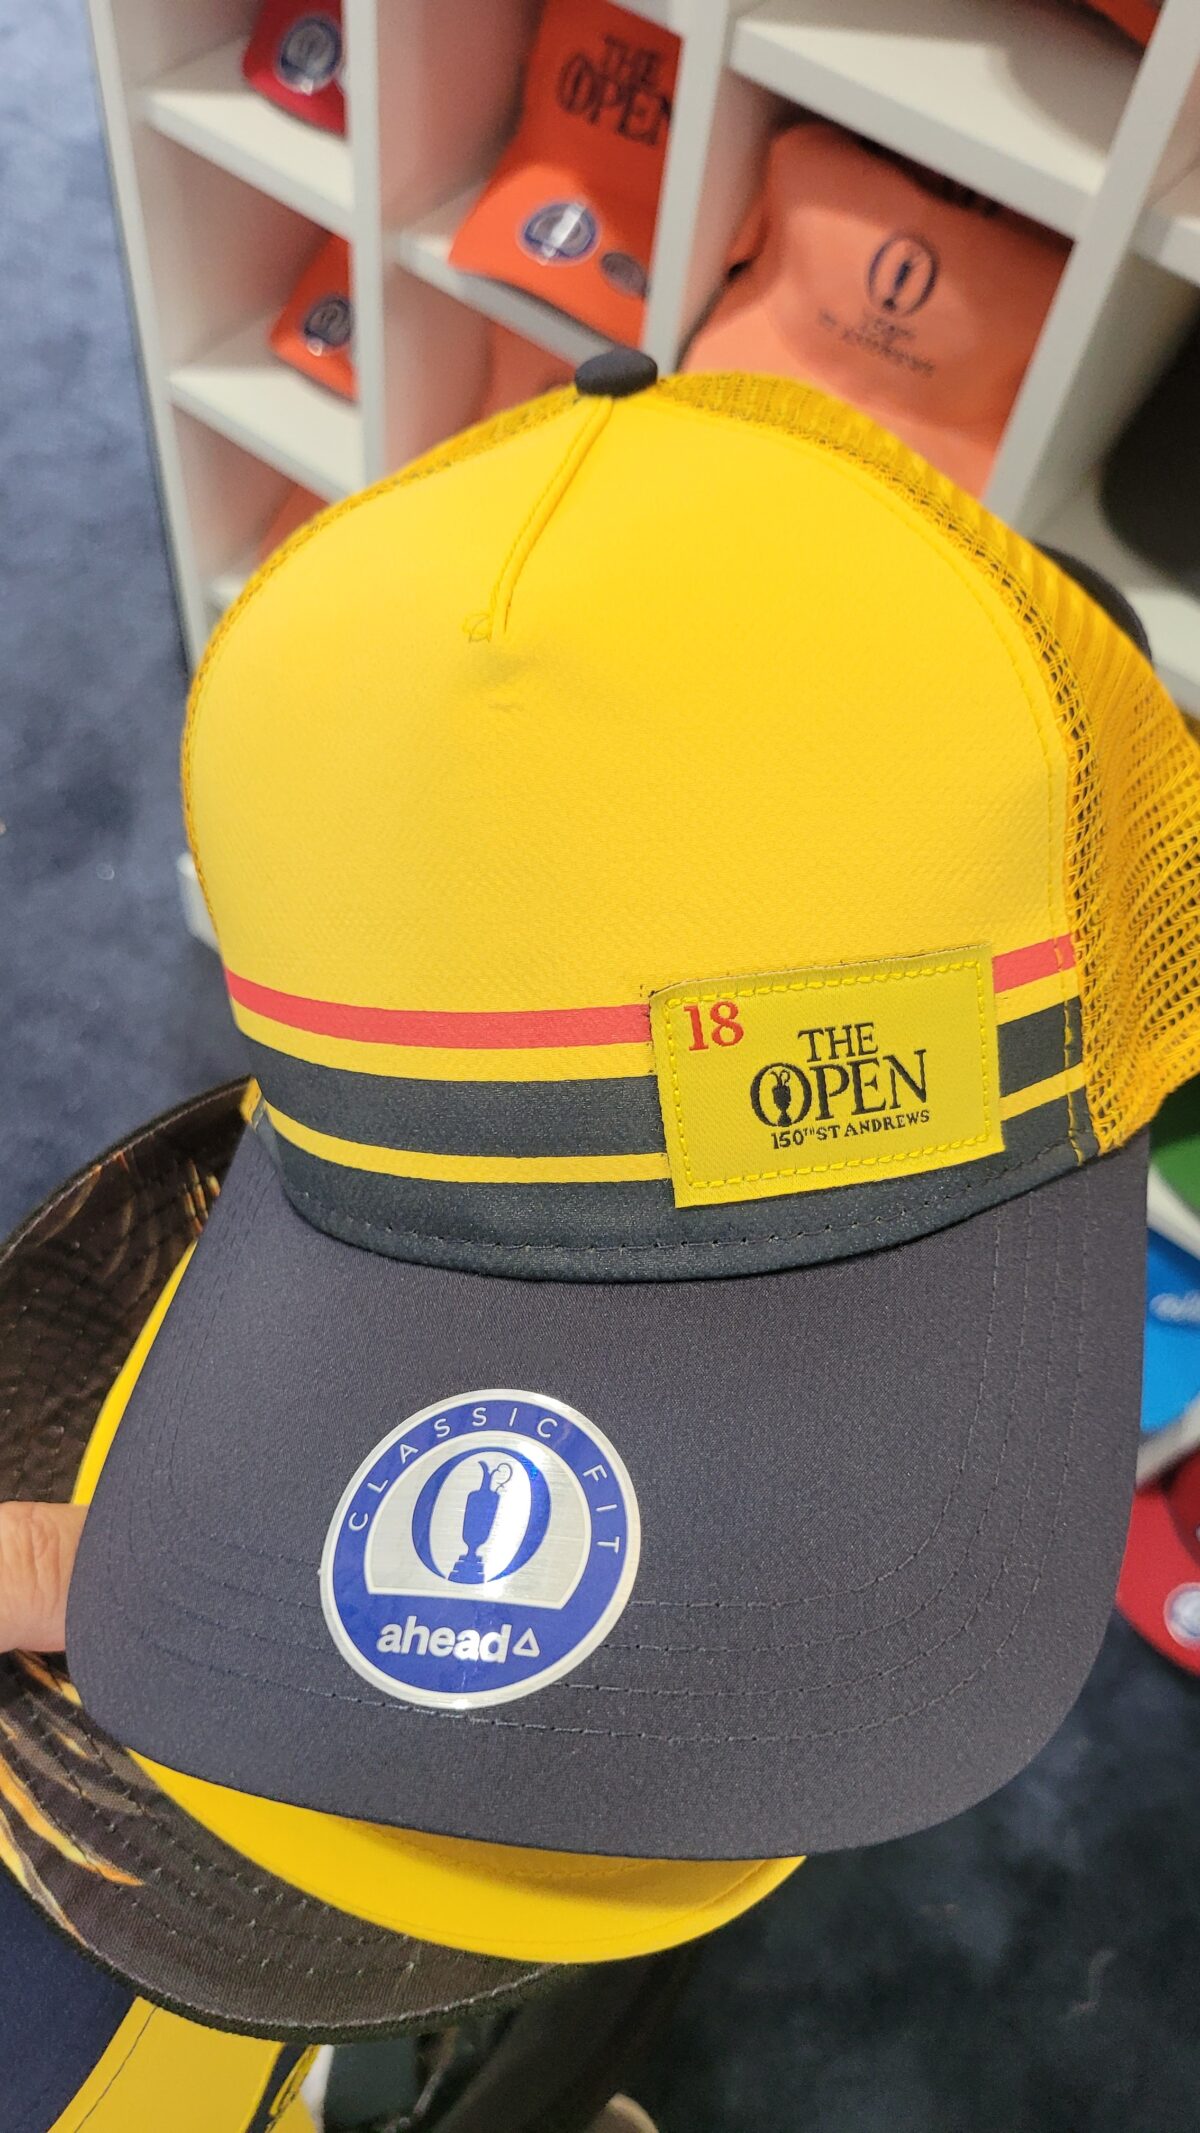 Photos: Some of the best merchandise at the 2022 British Open at St. Andrews